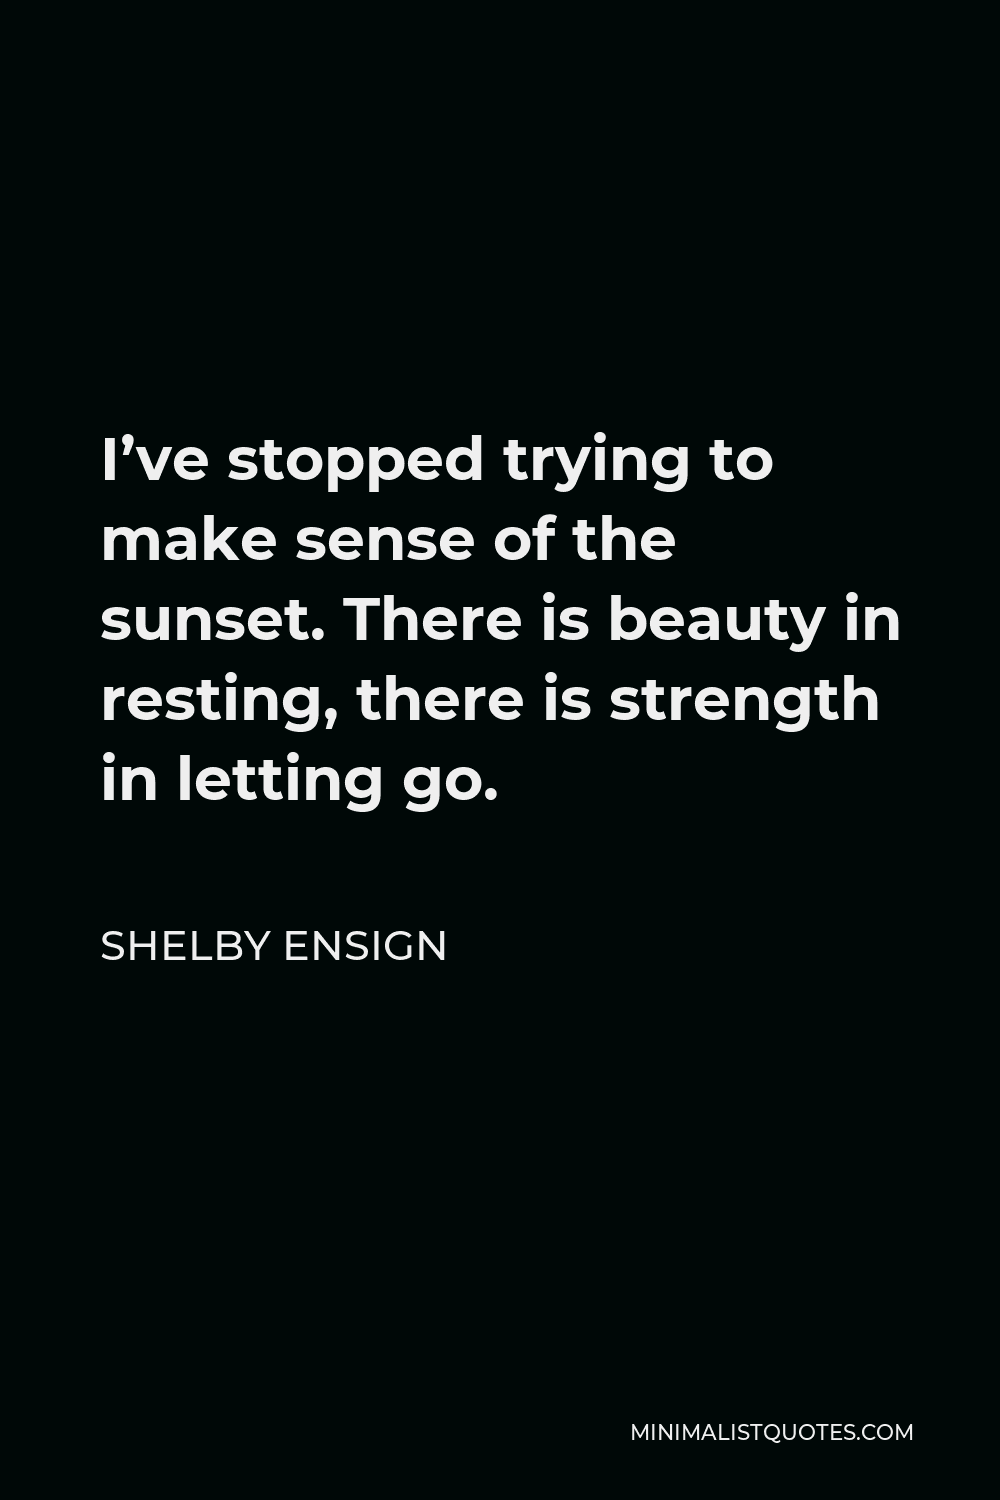 Shelby Ensign Quote - I’ve stopped trying to make sense of the sunset. There is beauty in resting, there is strength in letting go.